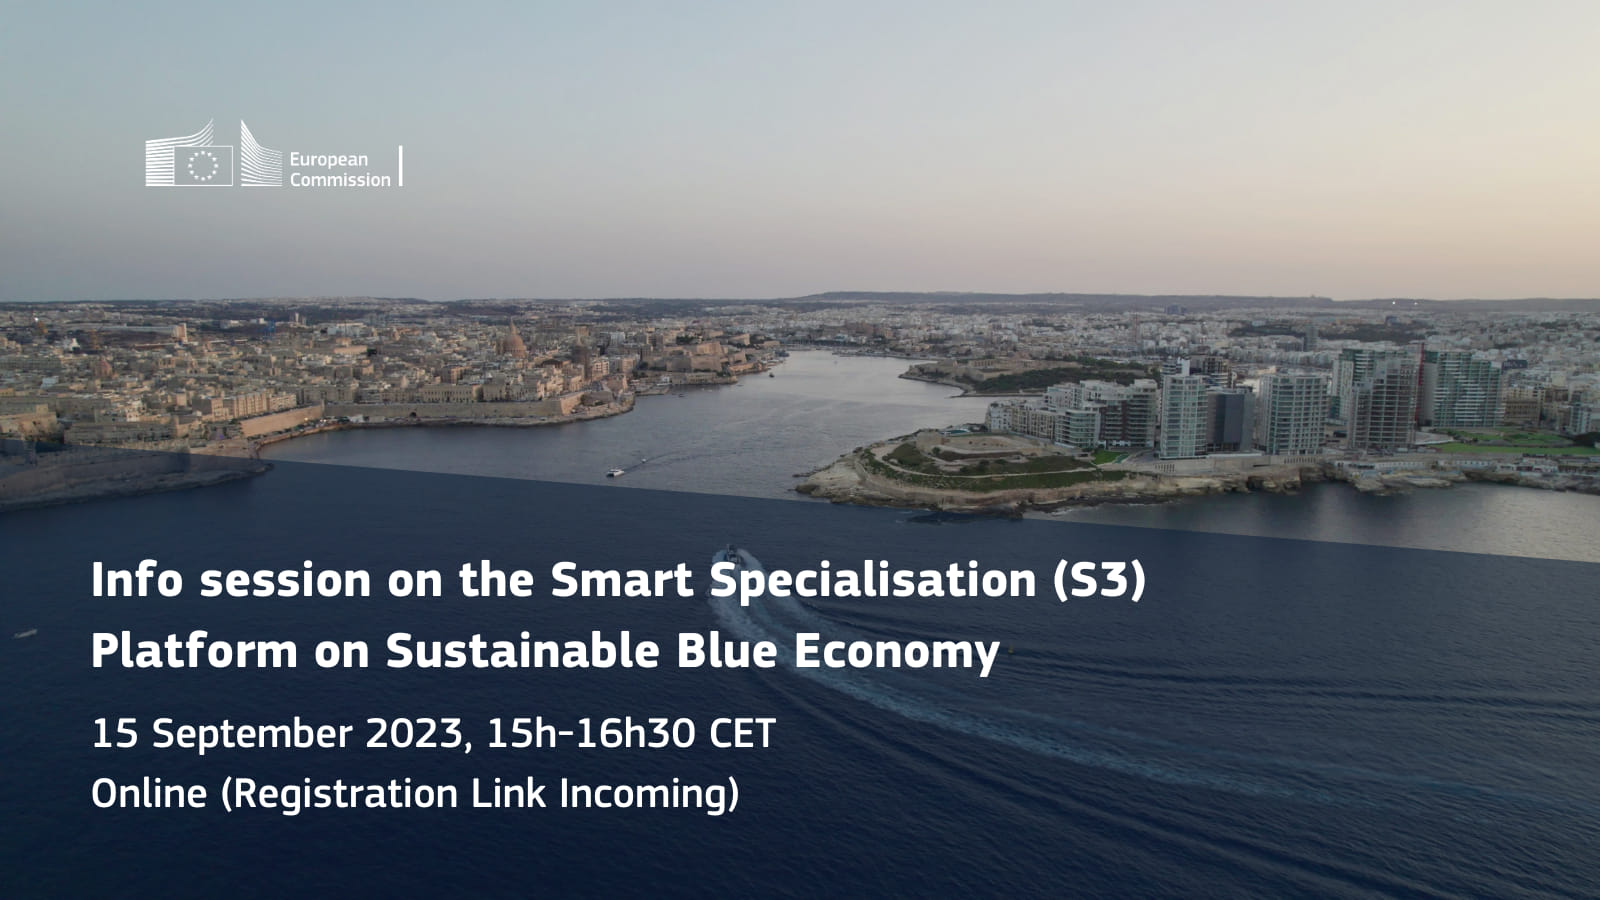 S3 information session September 2023 announcement poster with coastal city as background image